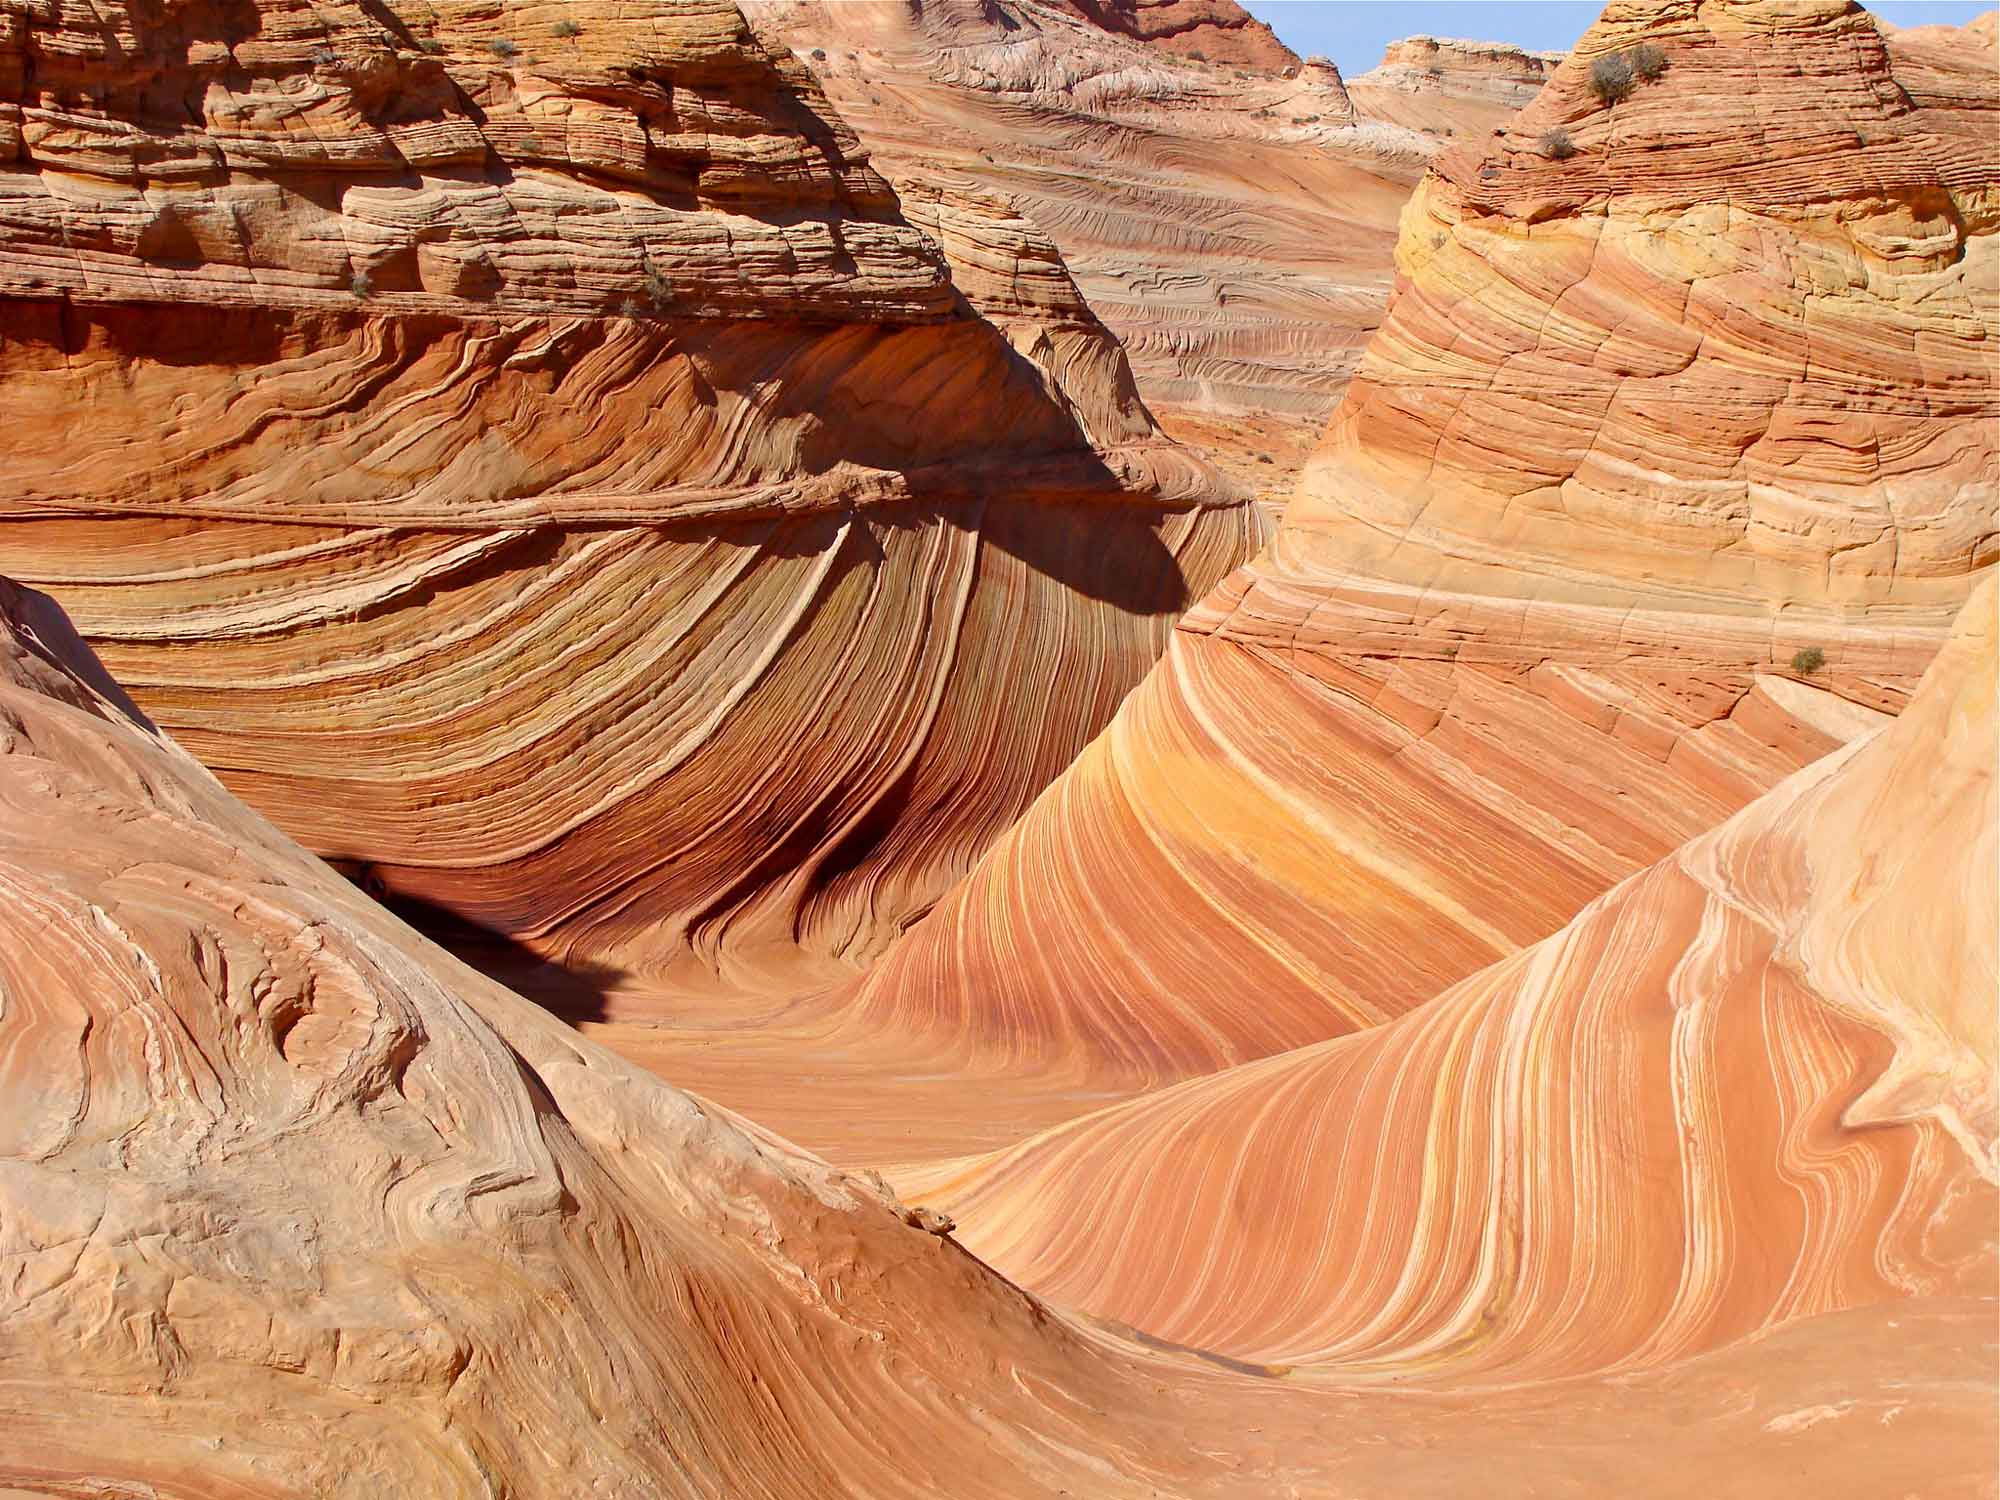 Photograph of a rock feature called "The Wave" exposed in Navajo Sandstone in Arizona.